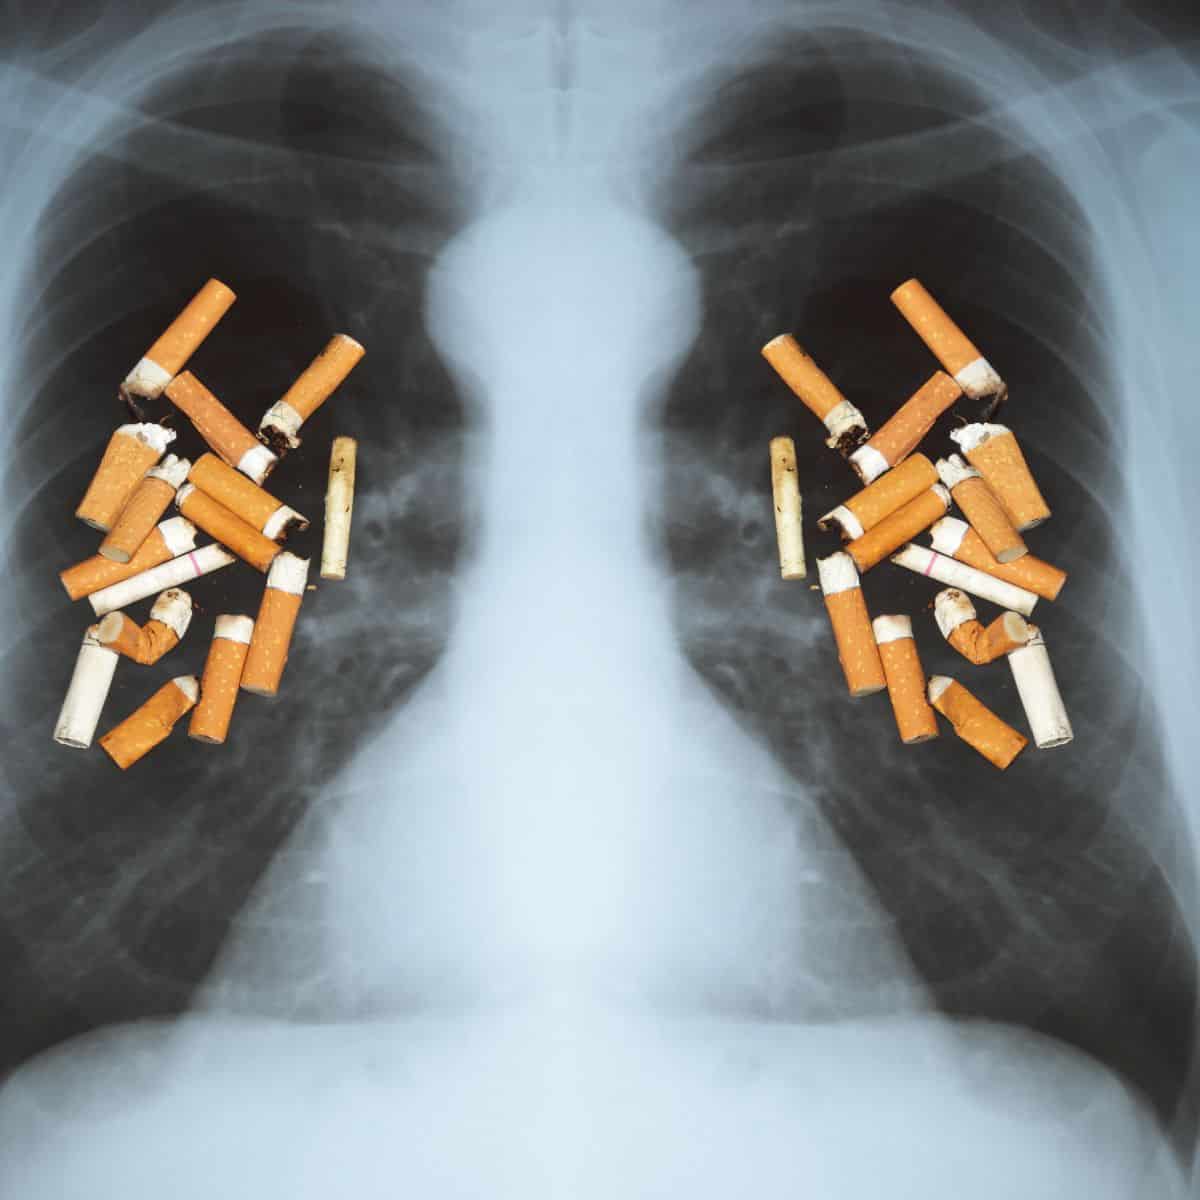 An ominous photo of an x ray of the lungs. On top of the x ray is various cigarette butts indicating health issues caused by nicotine use.